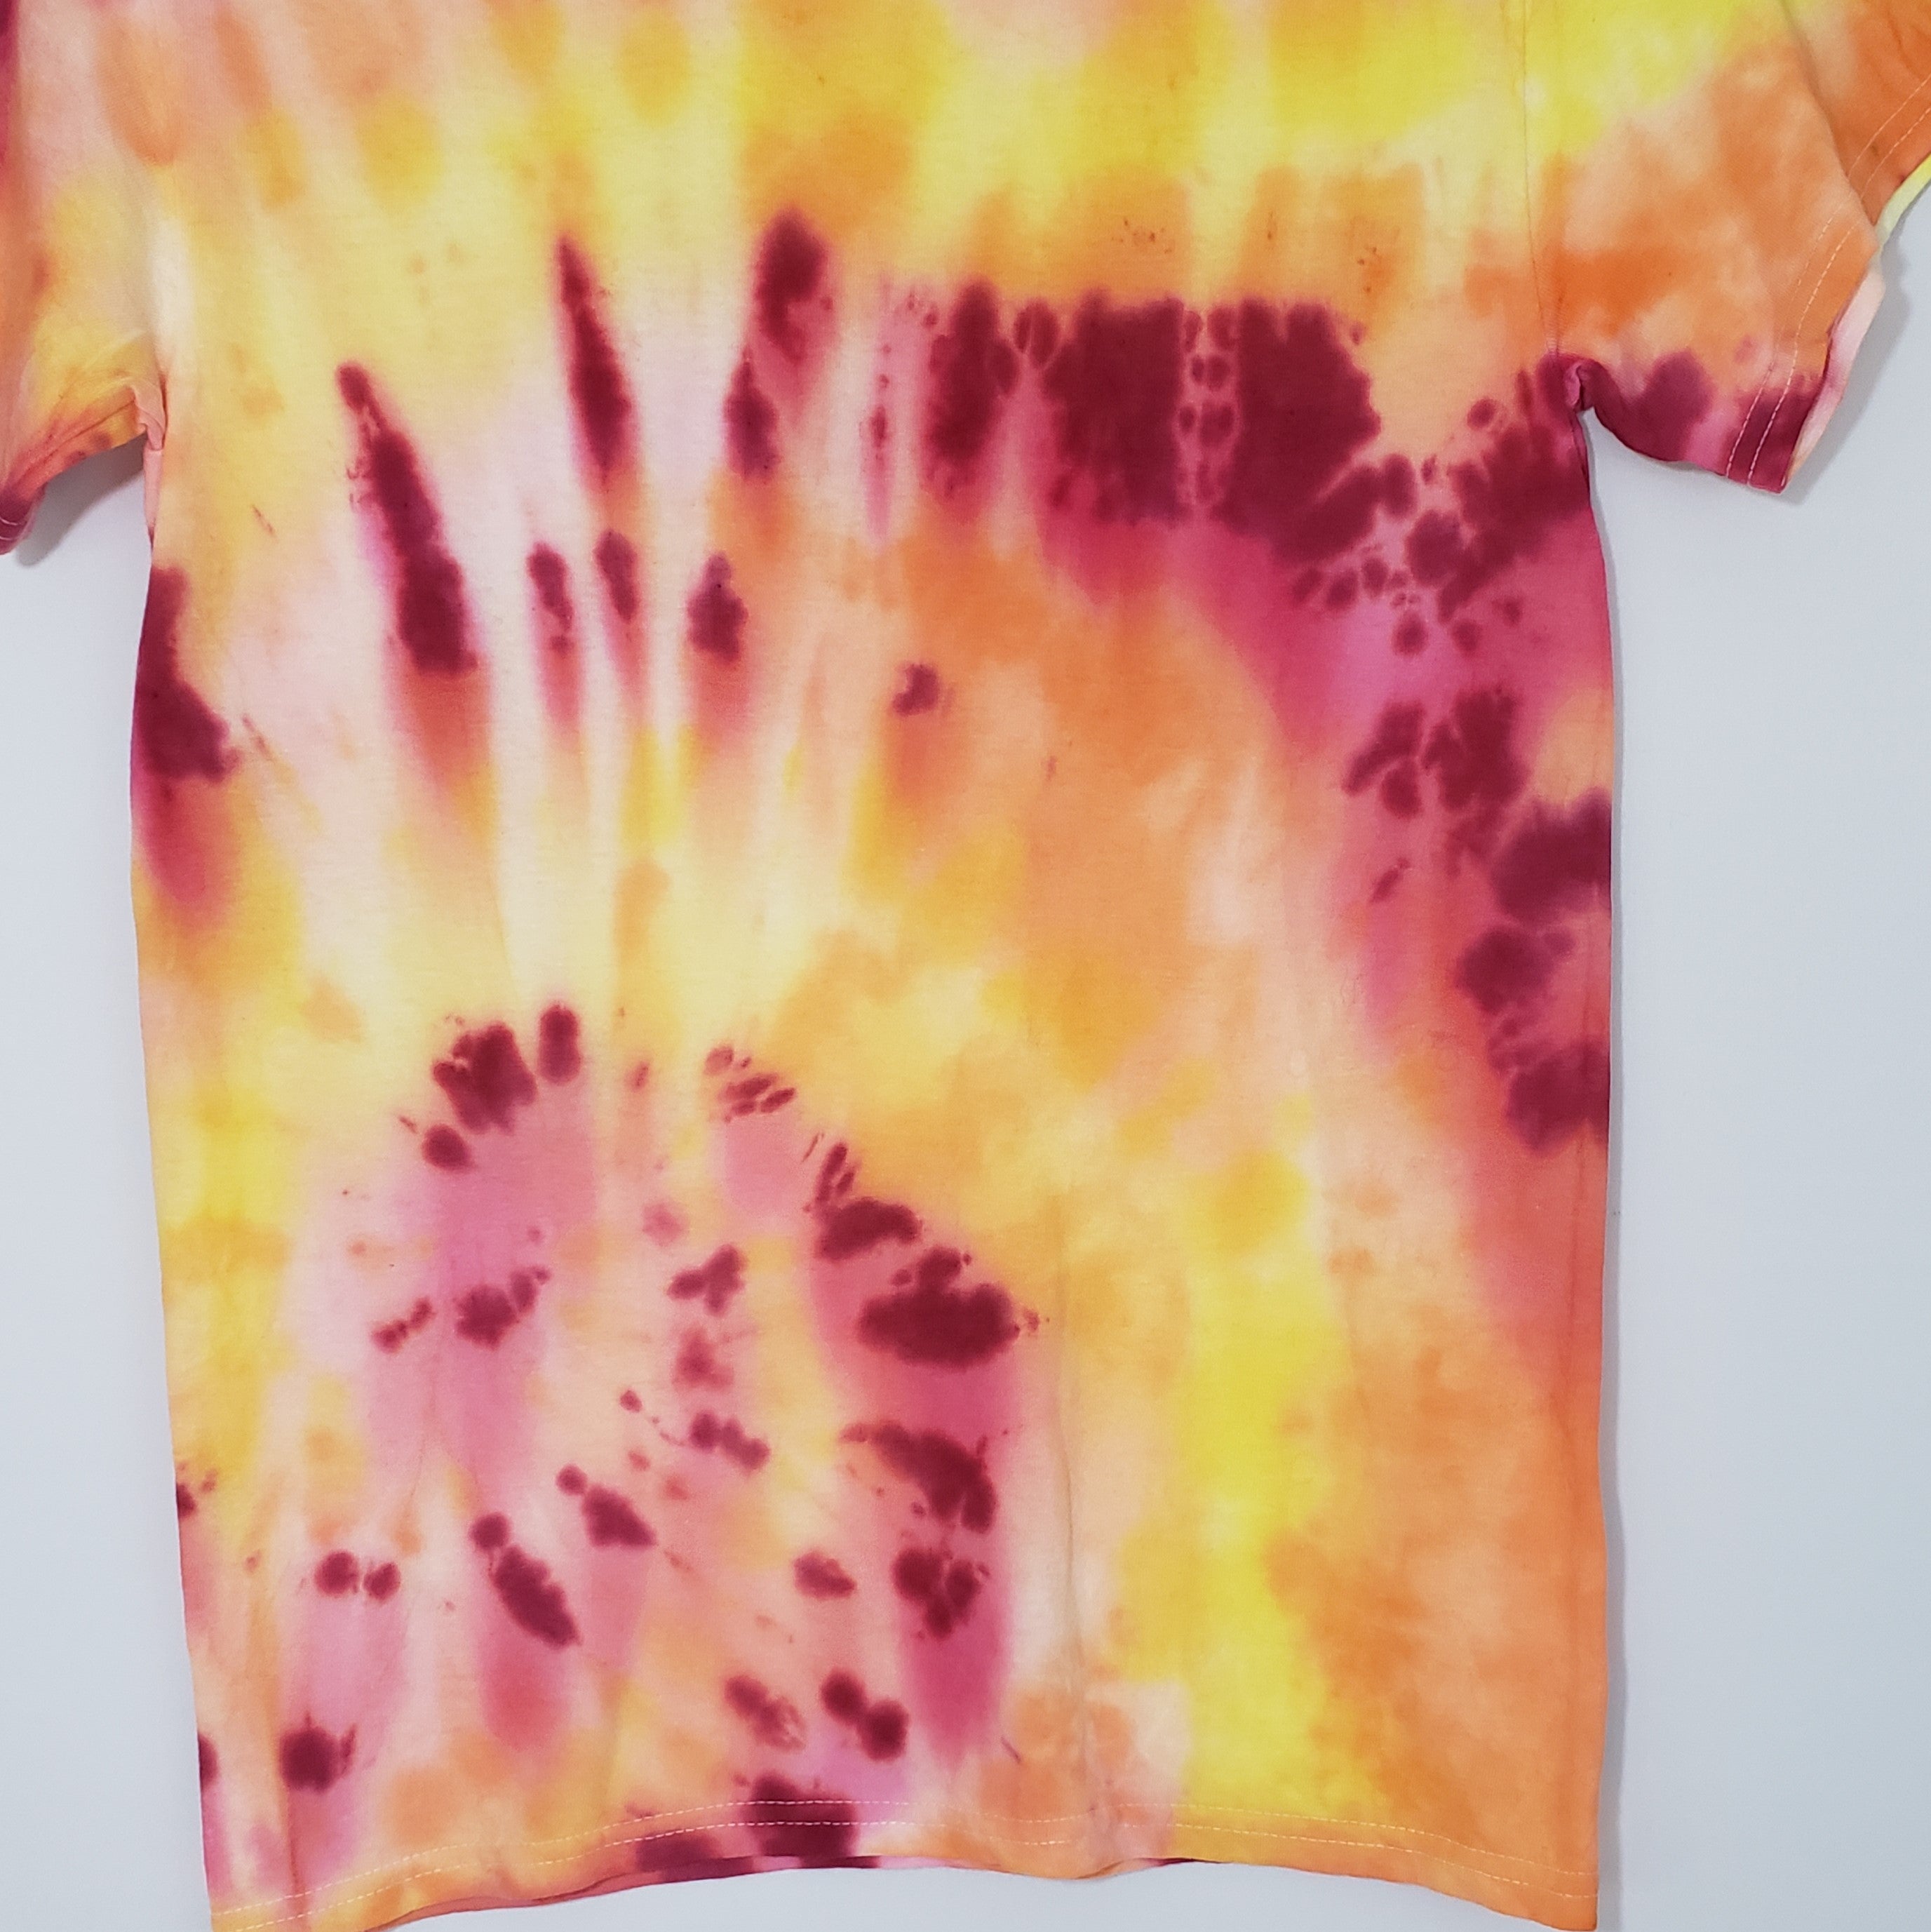 Tie-dye Bright, Fun & Colorful Shirts in Adult Size - Houzz of DVA Boutique